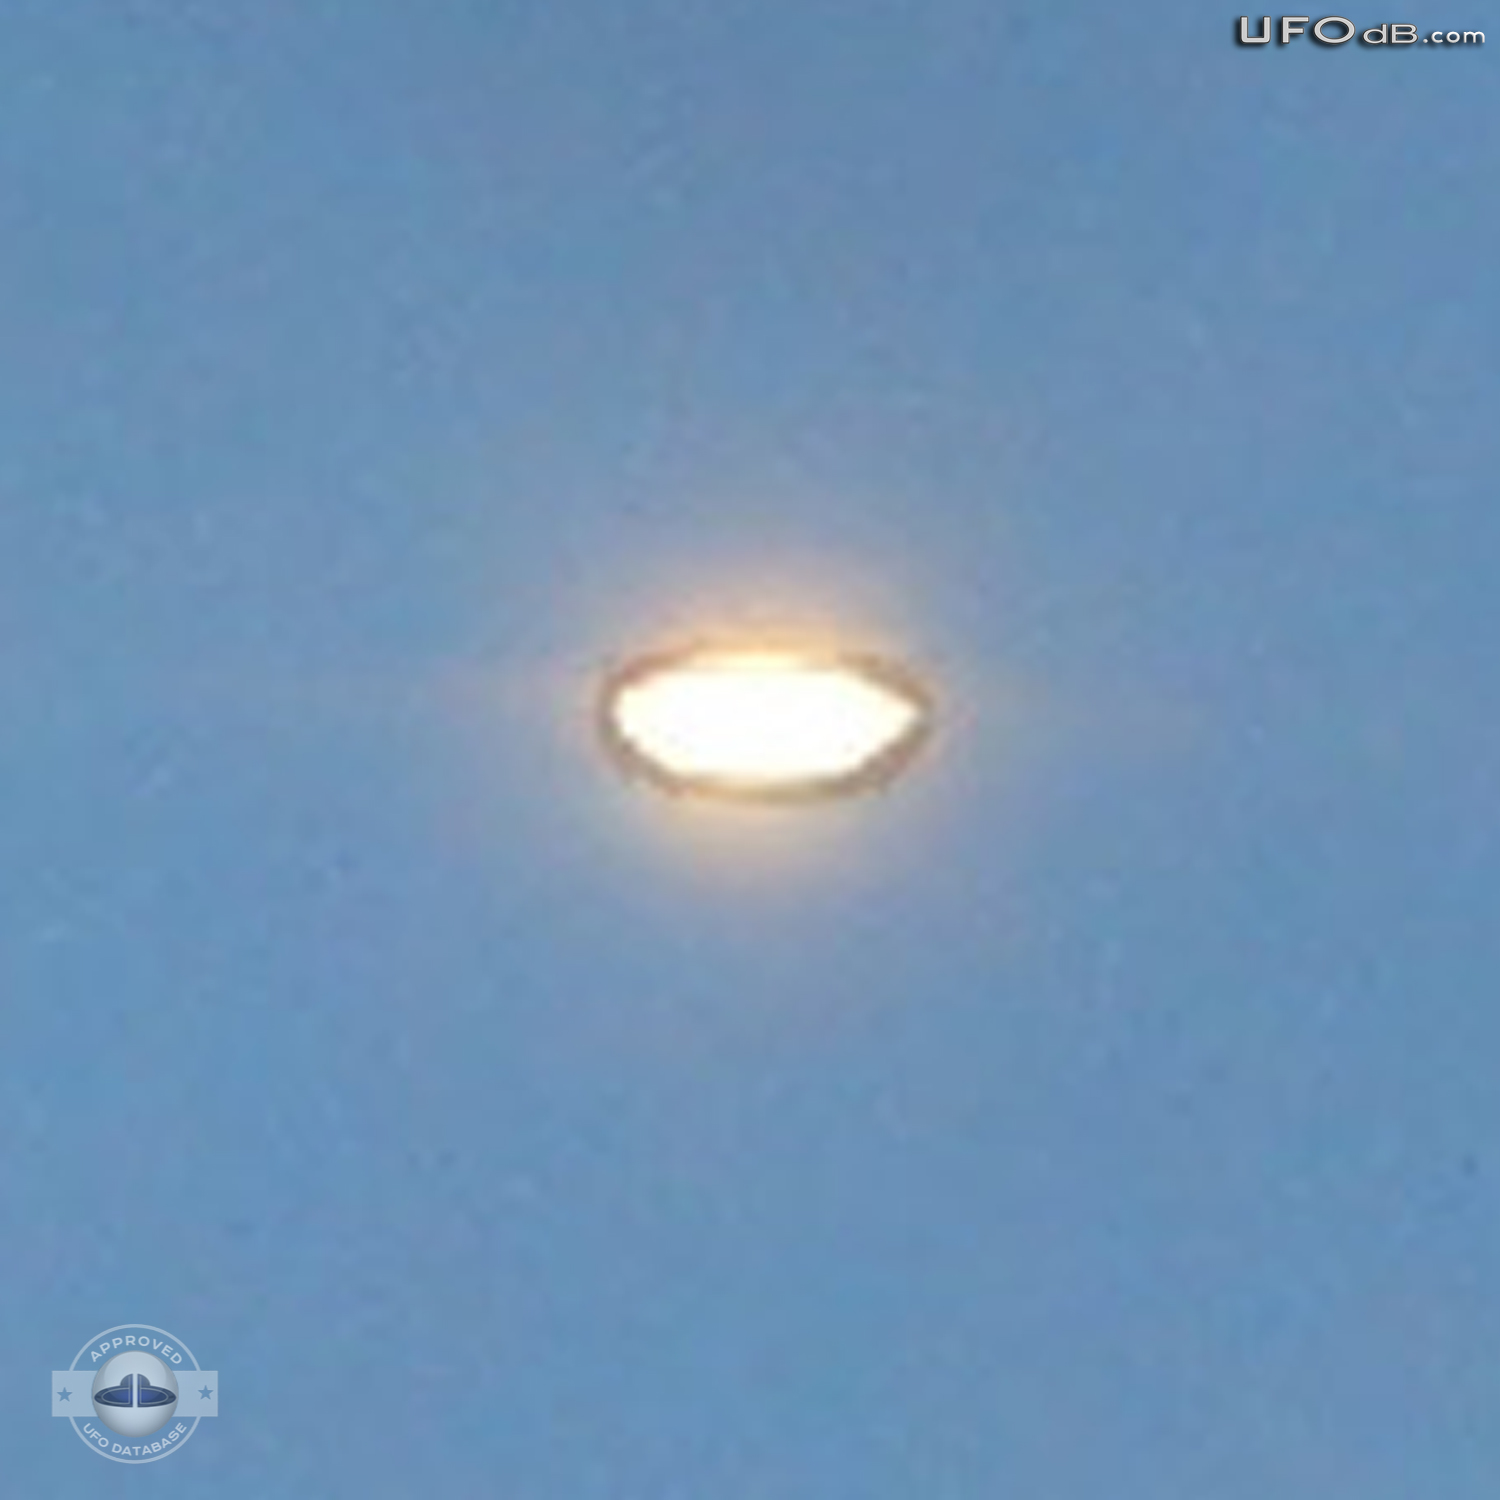 Darting UFO photographed from moving car | Bryncethin, Wales, UK 2011 UFO Picture #275-4